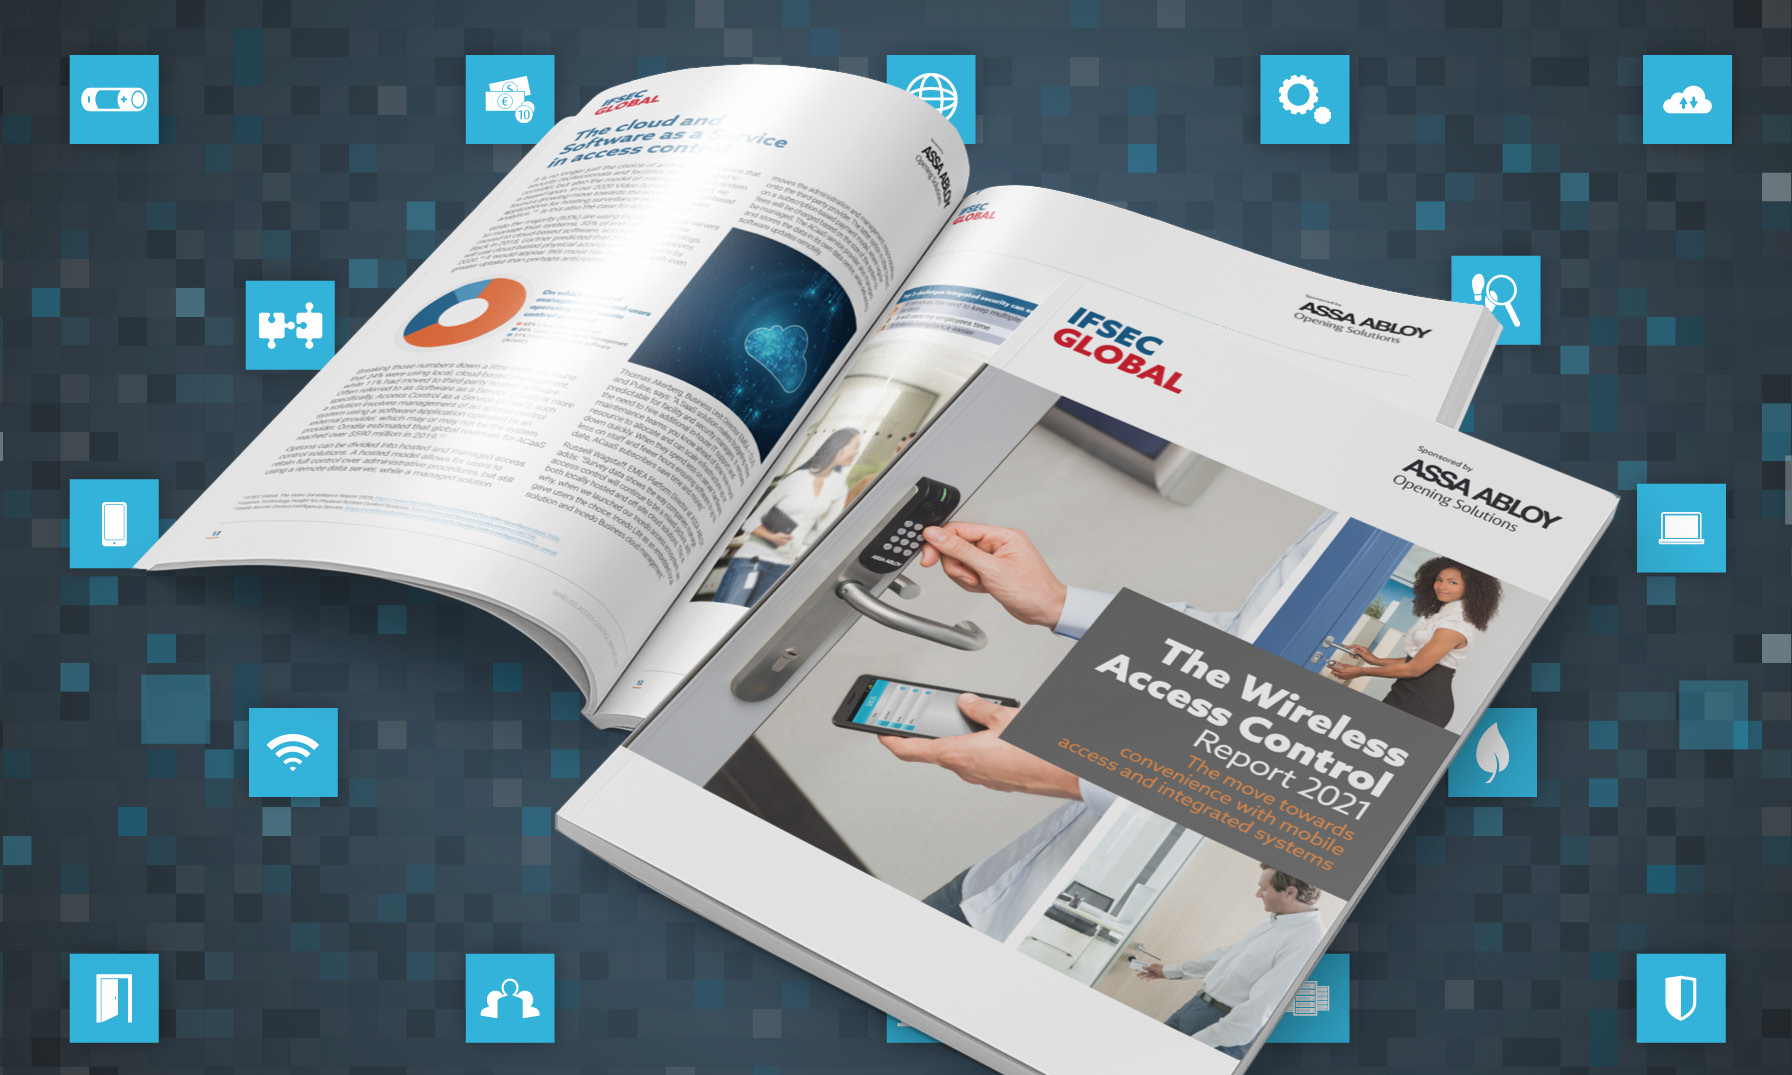 New wireless access control report identifies sector trends and technologies to watch in 2021